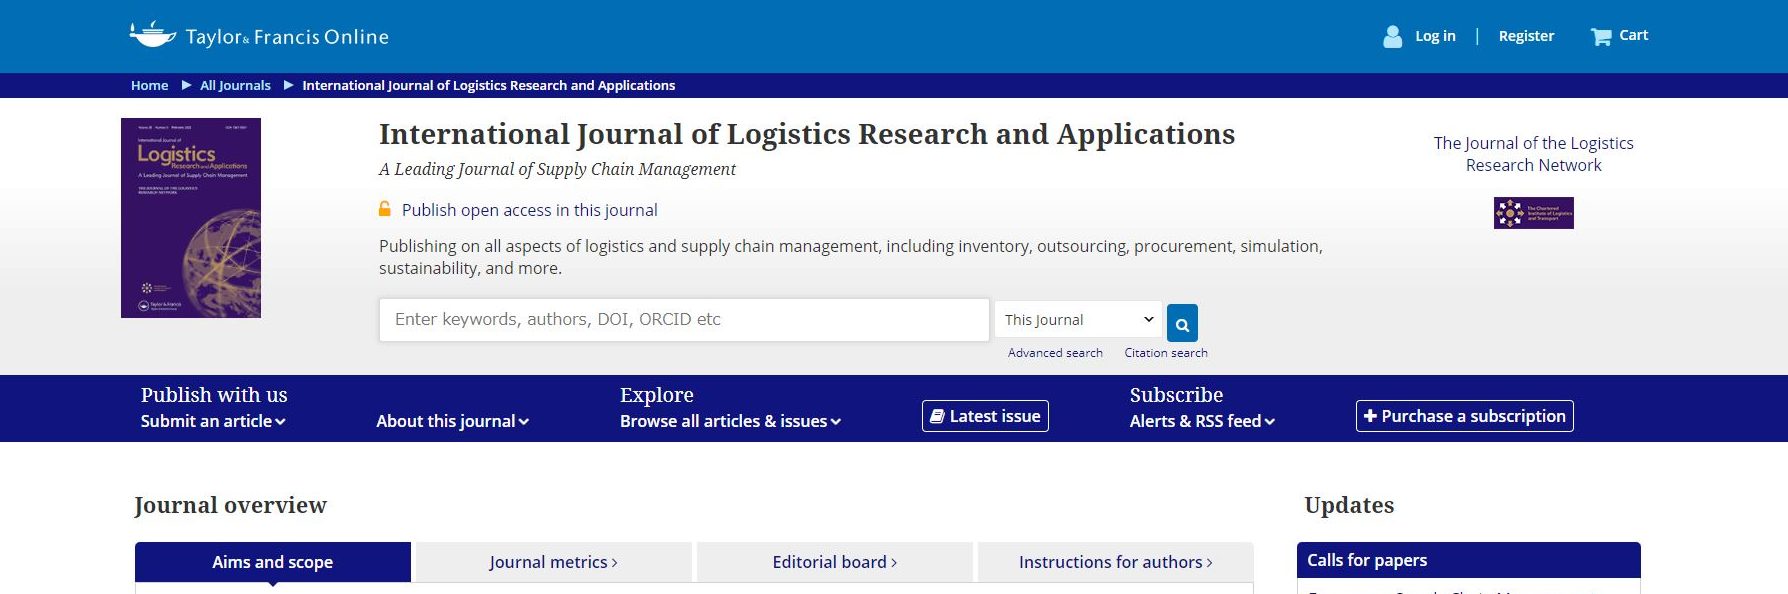 International Journal of Logistics Research and Applications